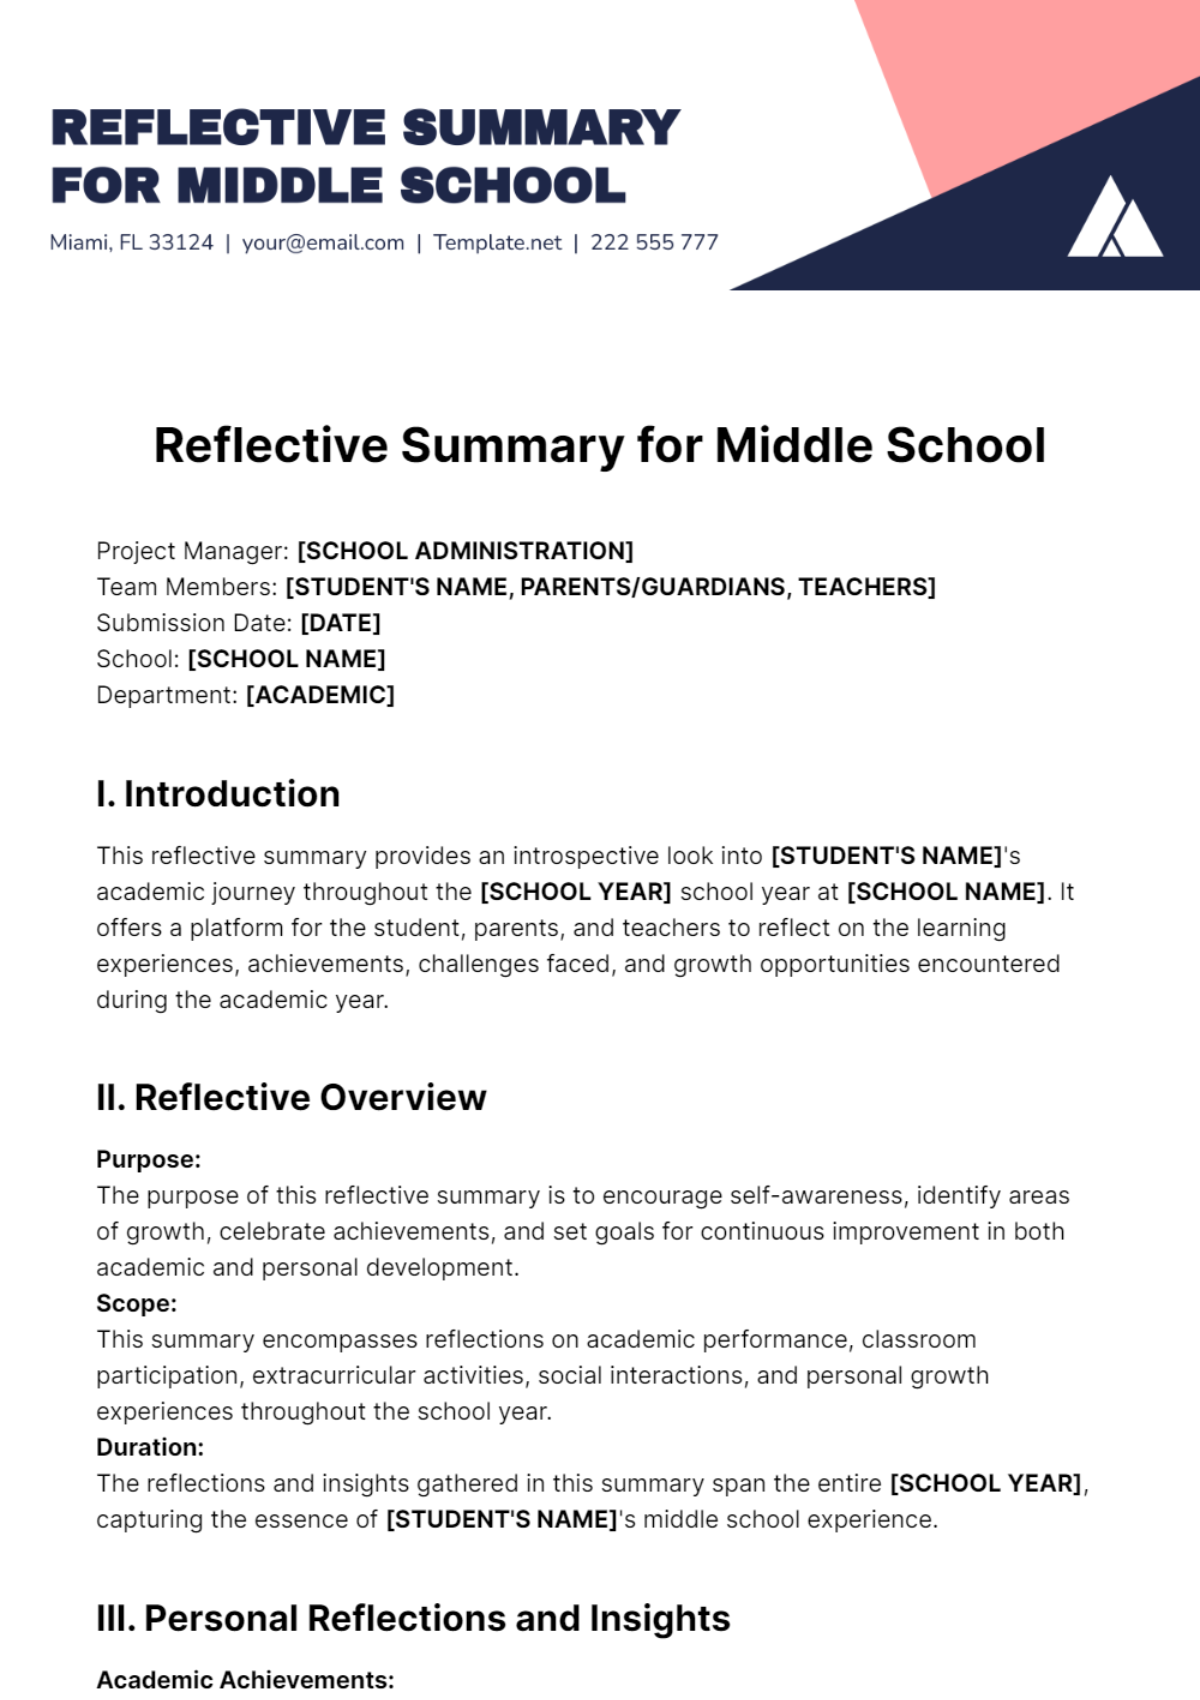 Reflective Summary for Middle School Template